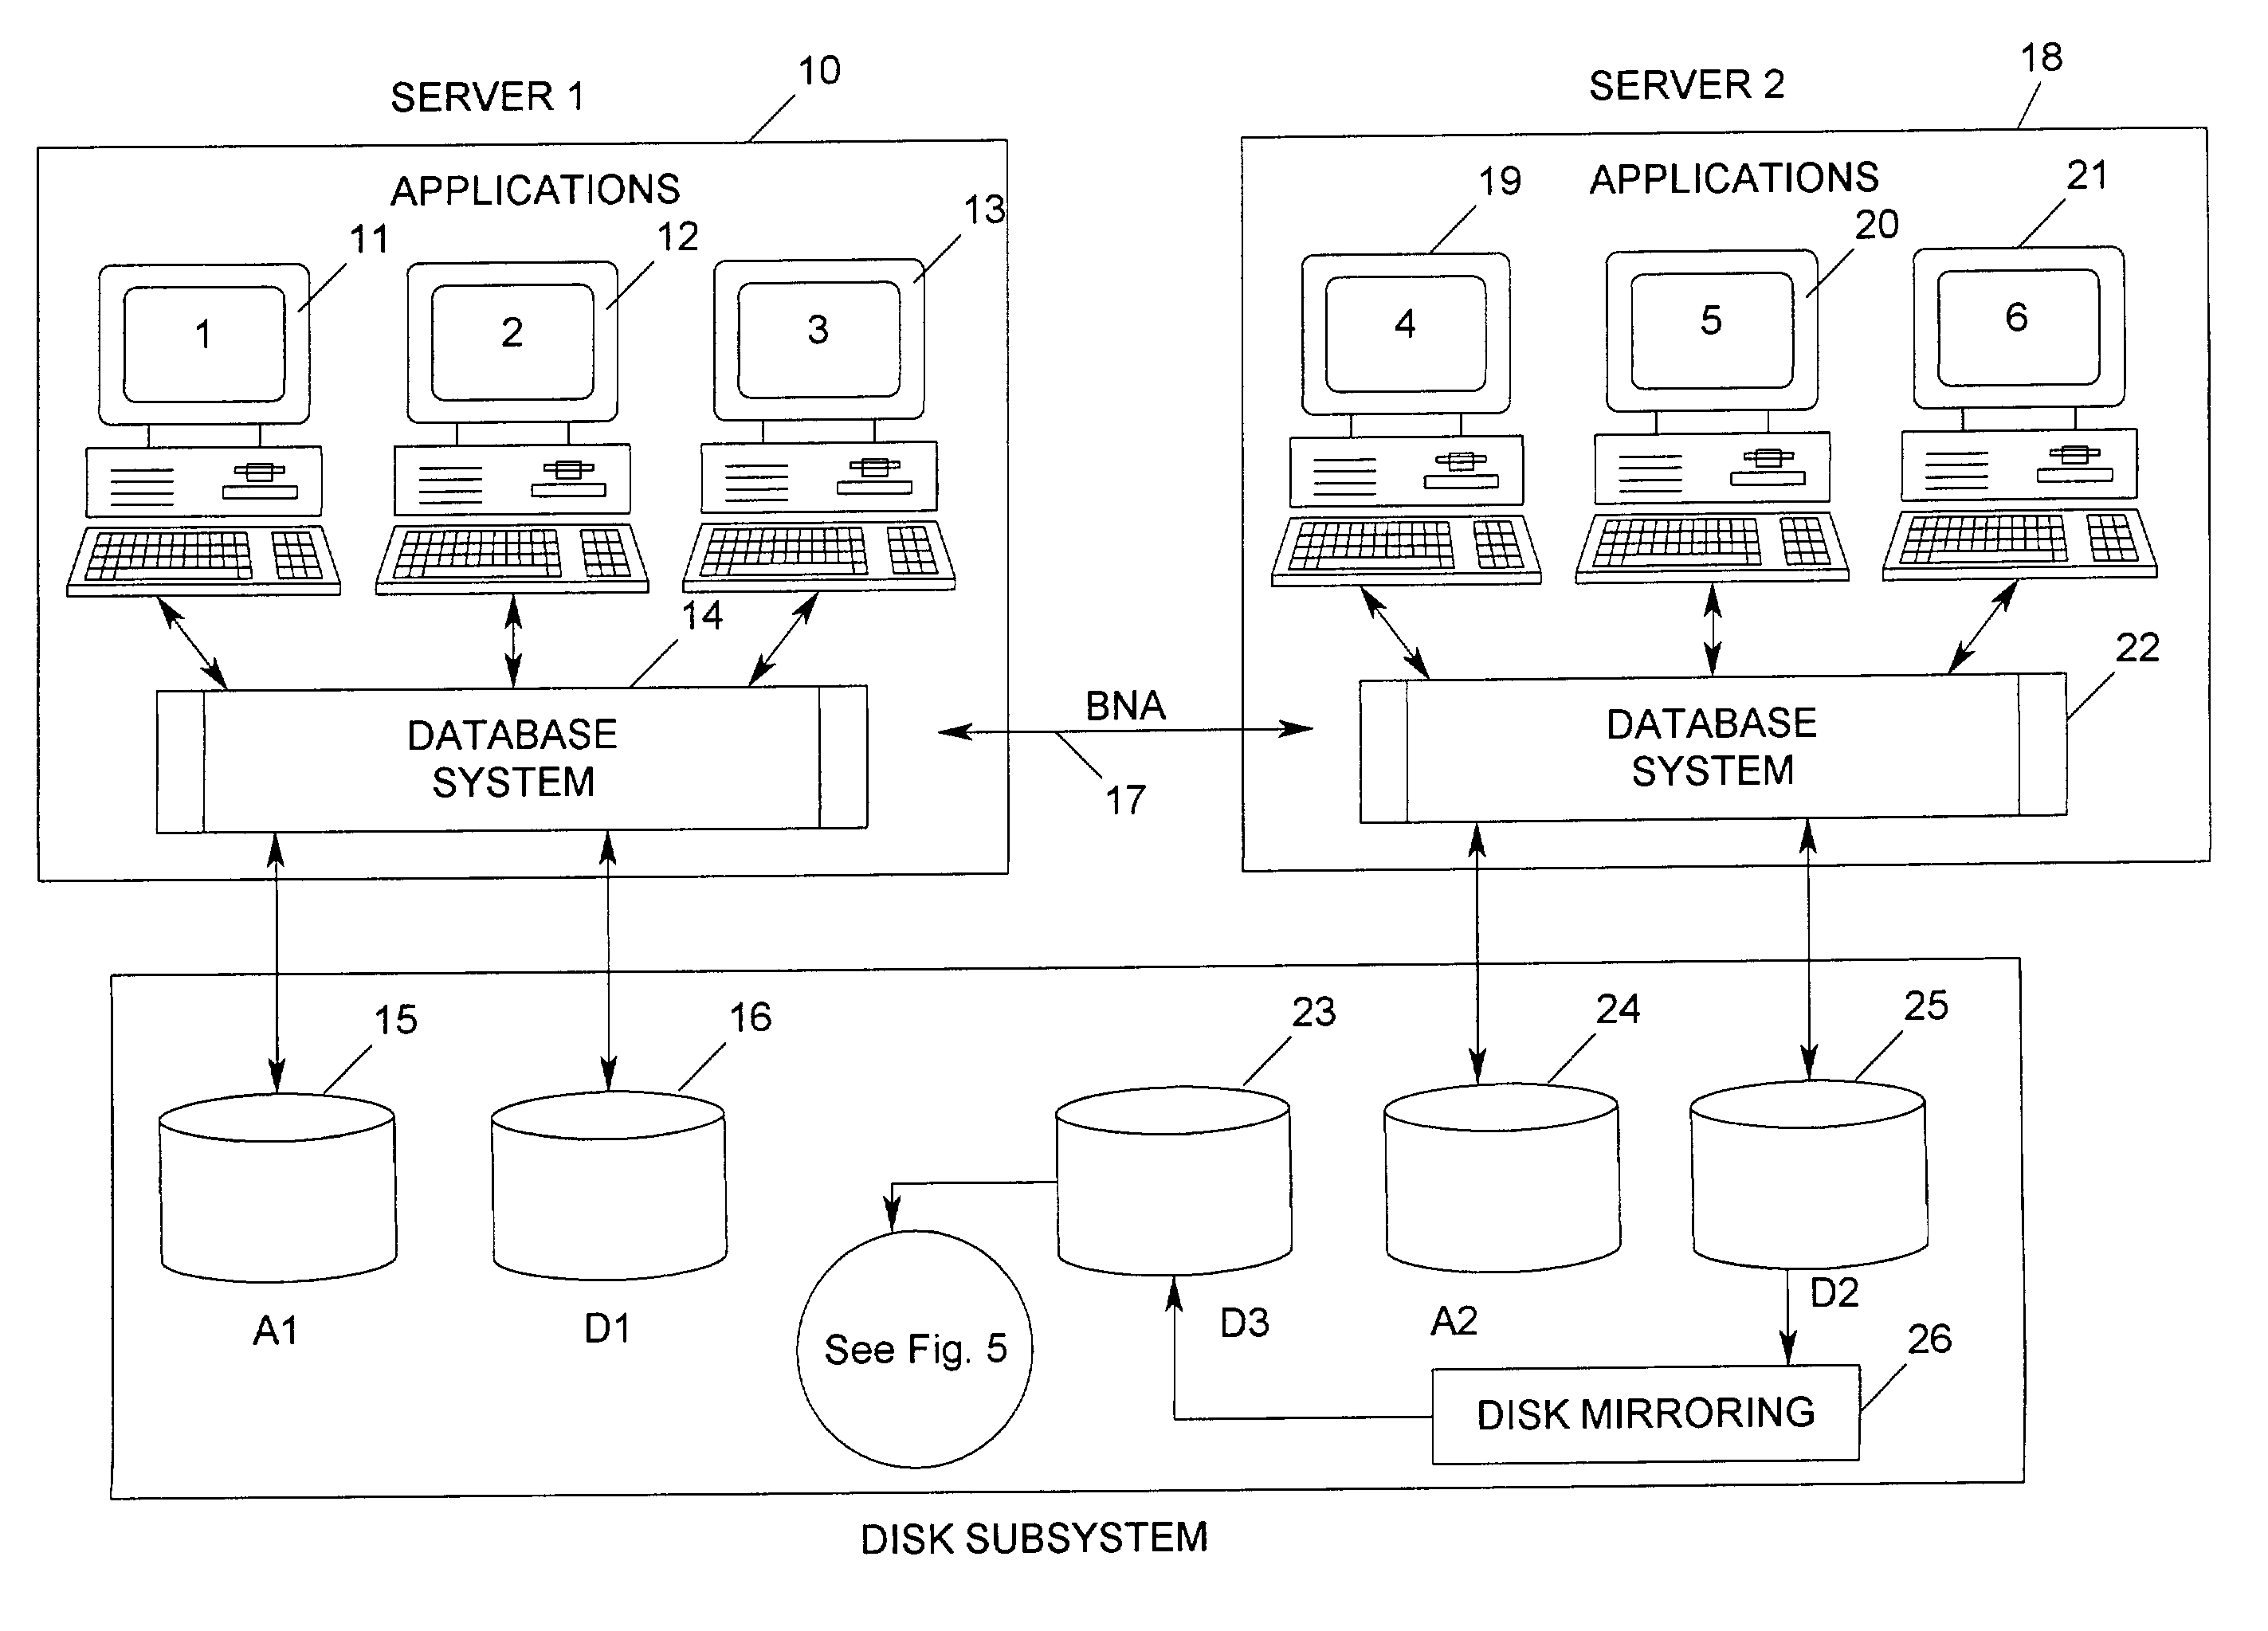 Method for capturing a physically consistent mirrored snapshot of an online database from a remote database backup system